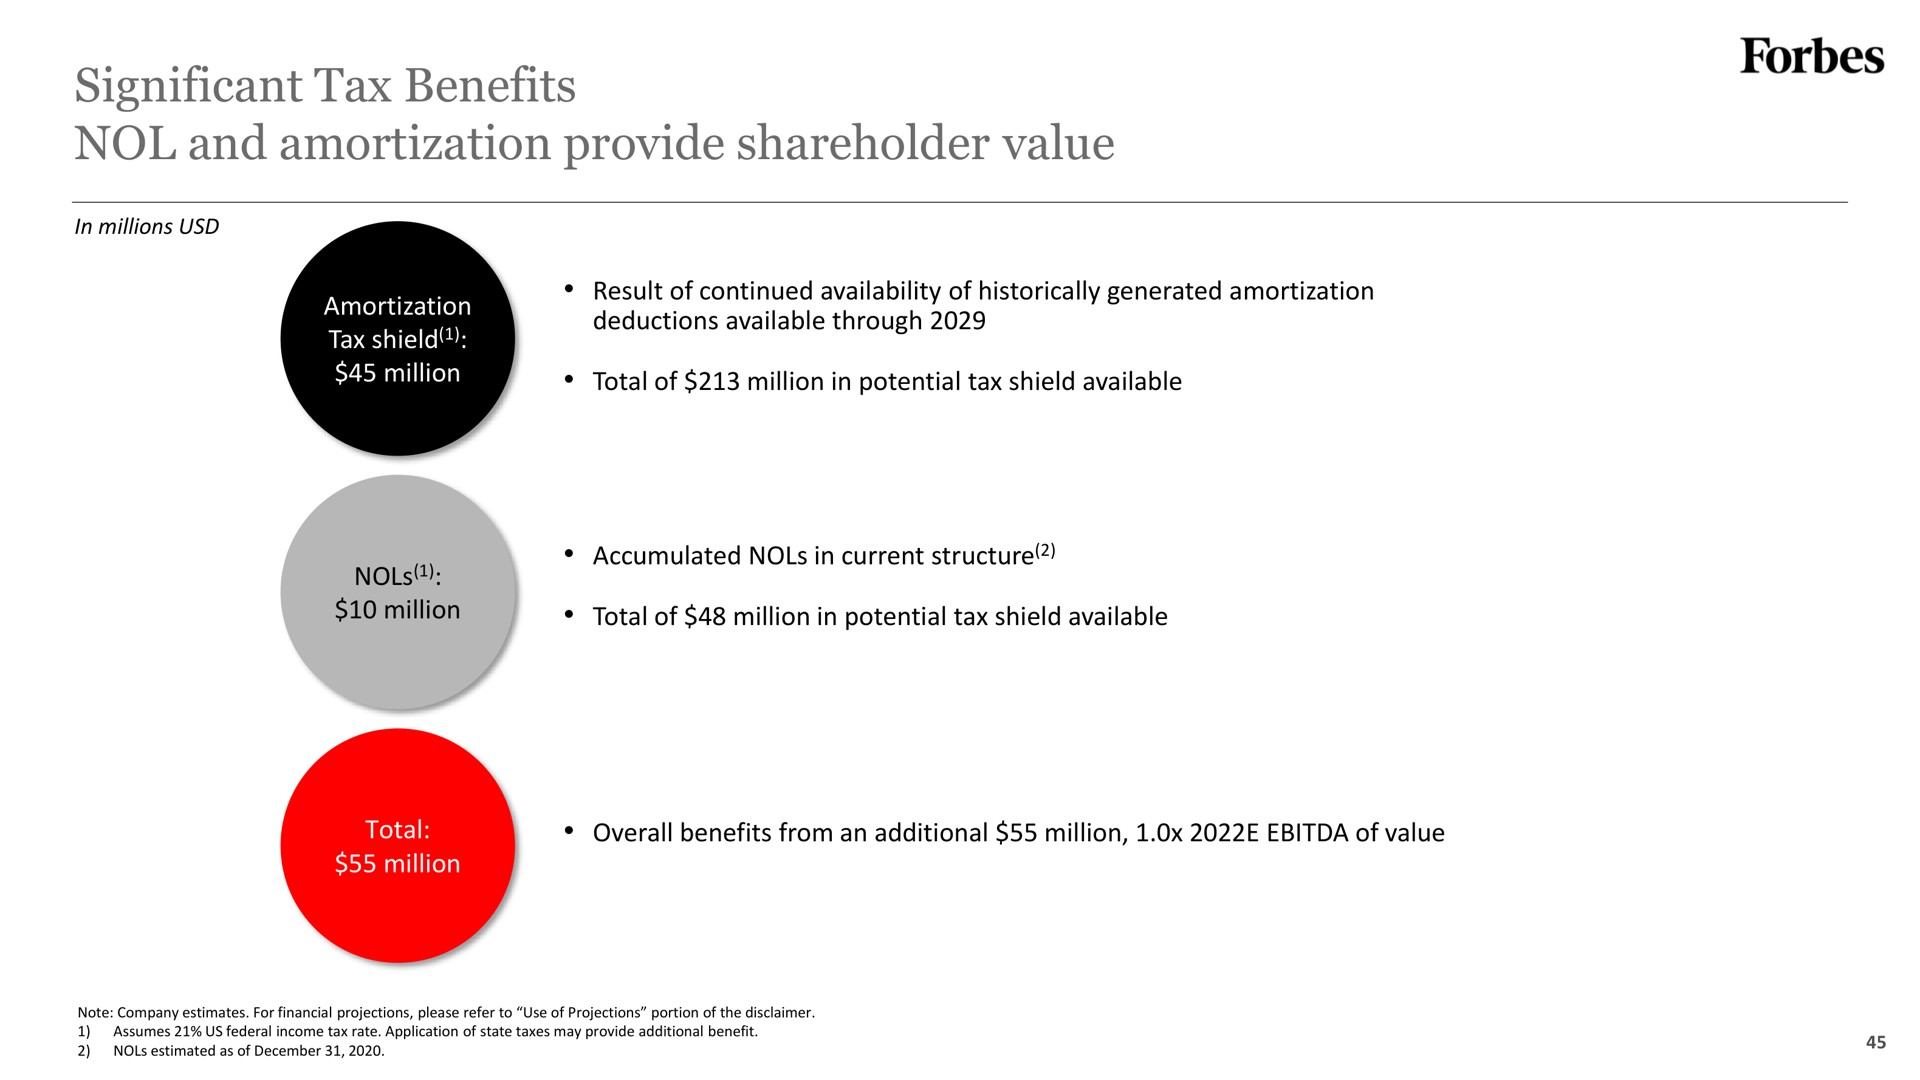 significant tax benefits and amortization provide shareholder value | Forbes